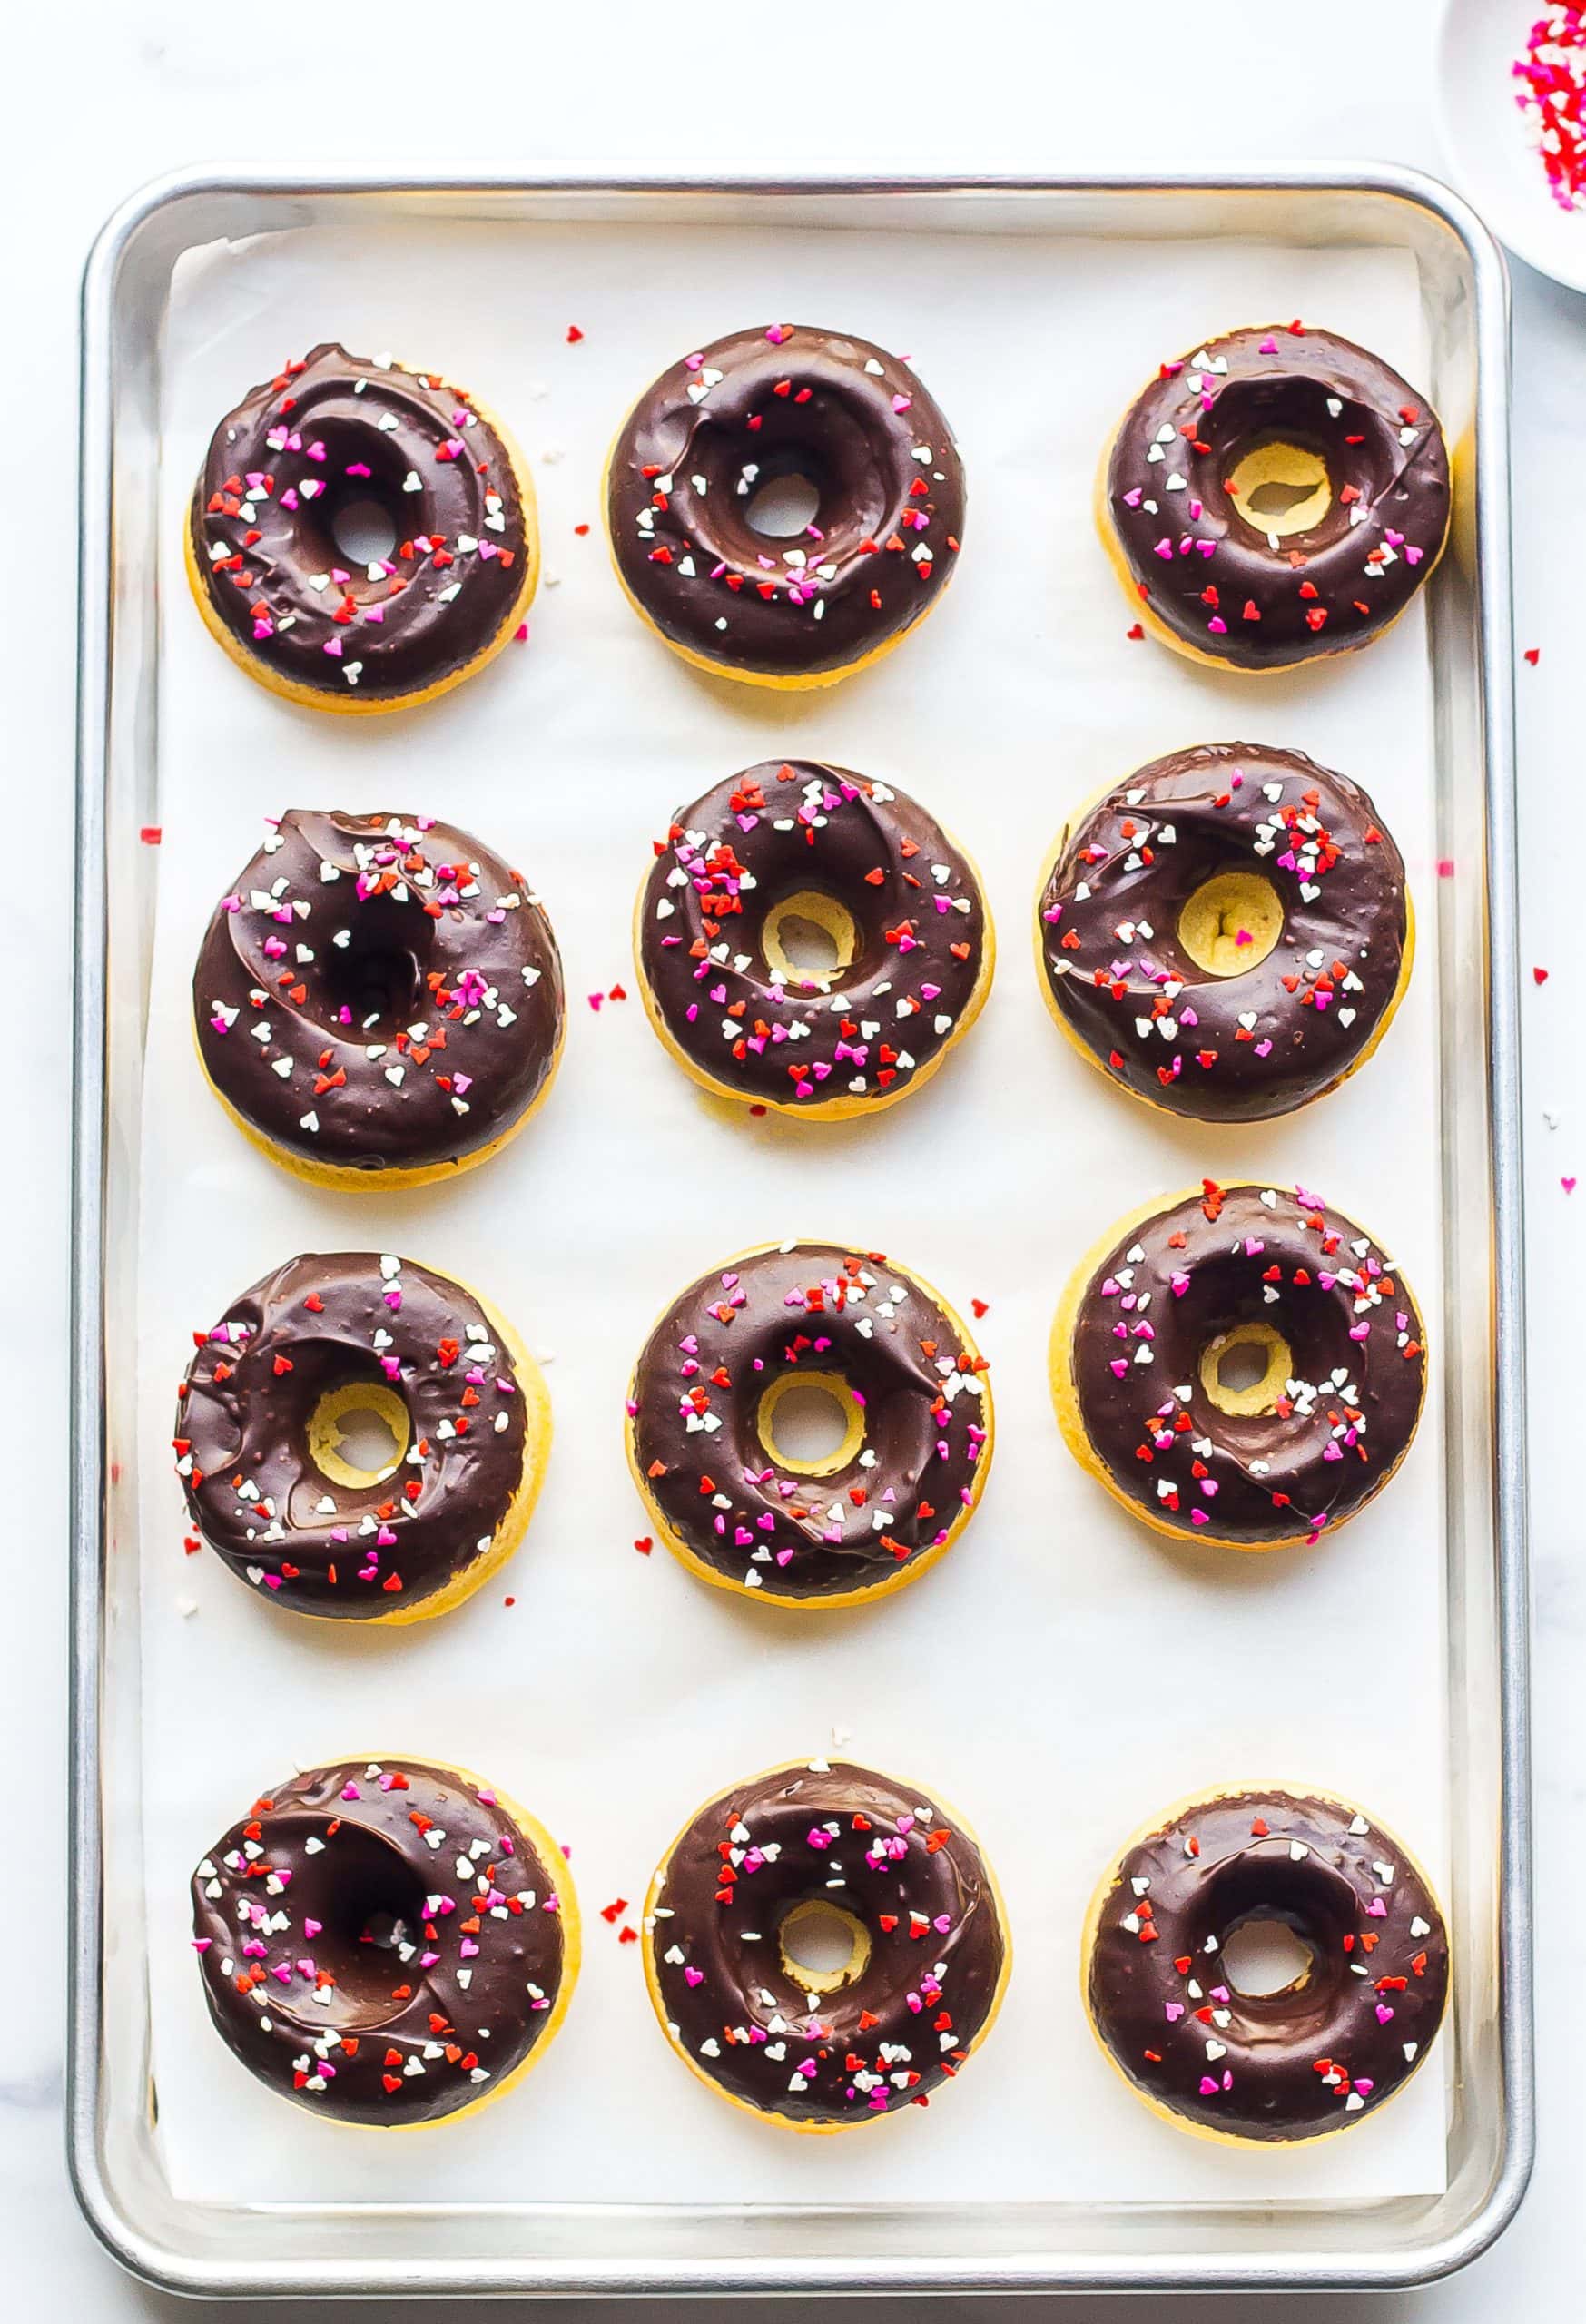 frosted baked donuts on baking sheet with sprinkles